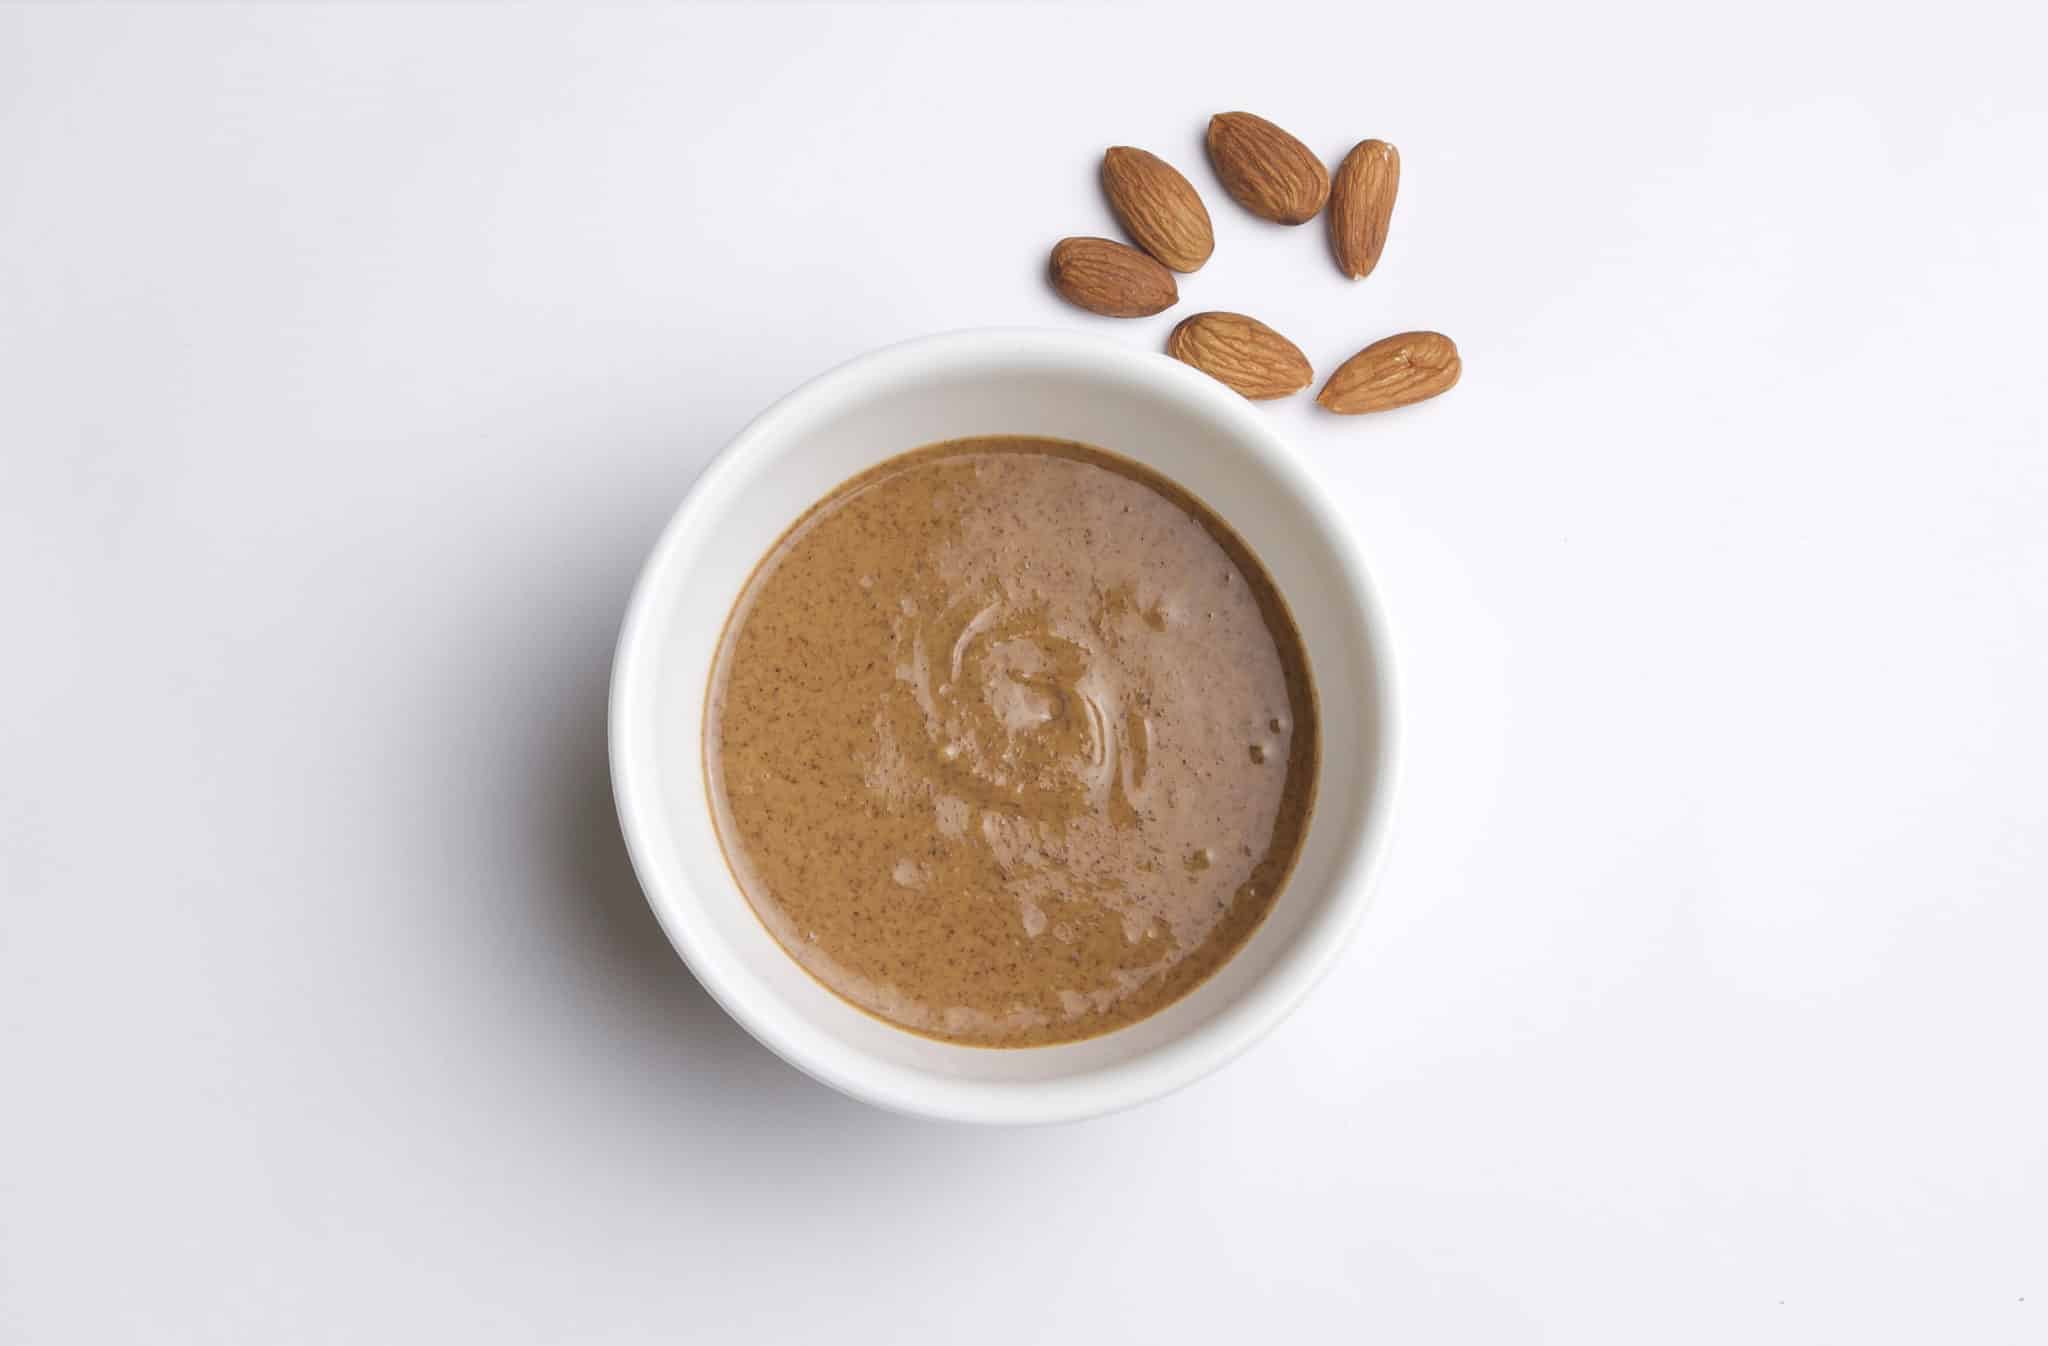 Full of healthy protein, almond butter is a key for easy snacks!